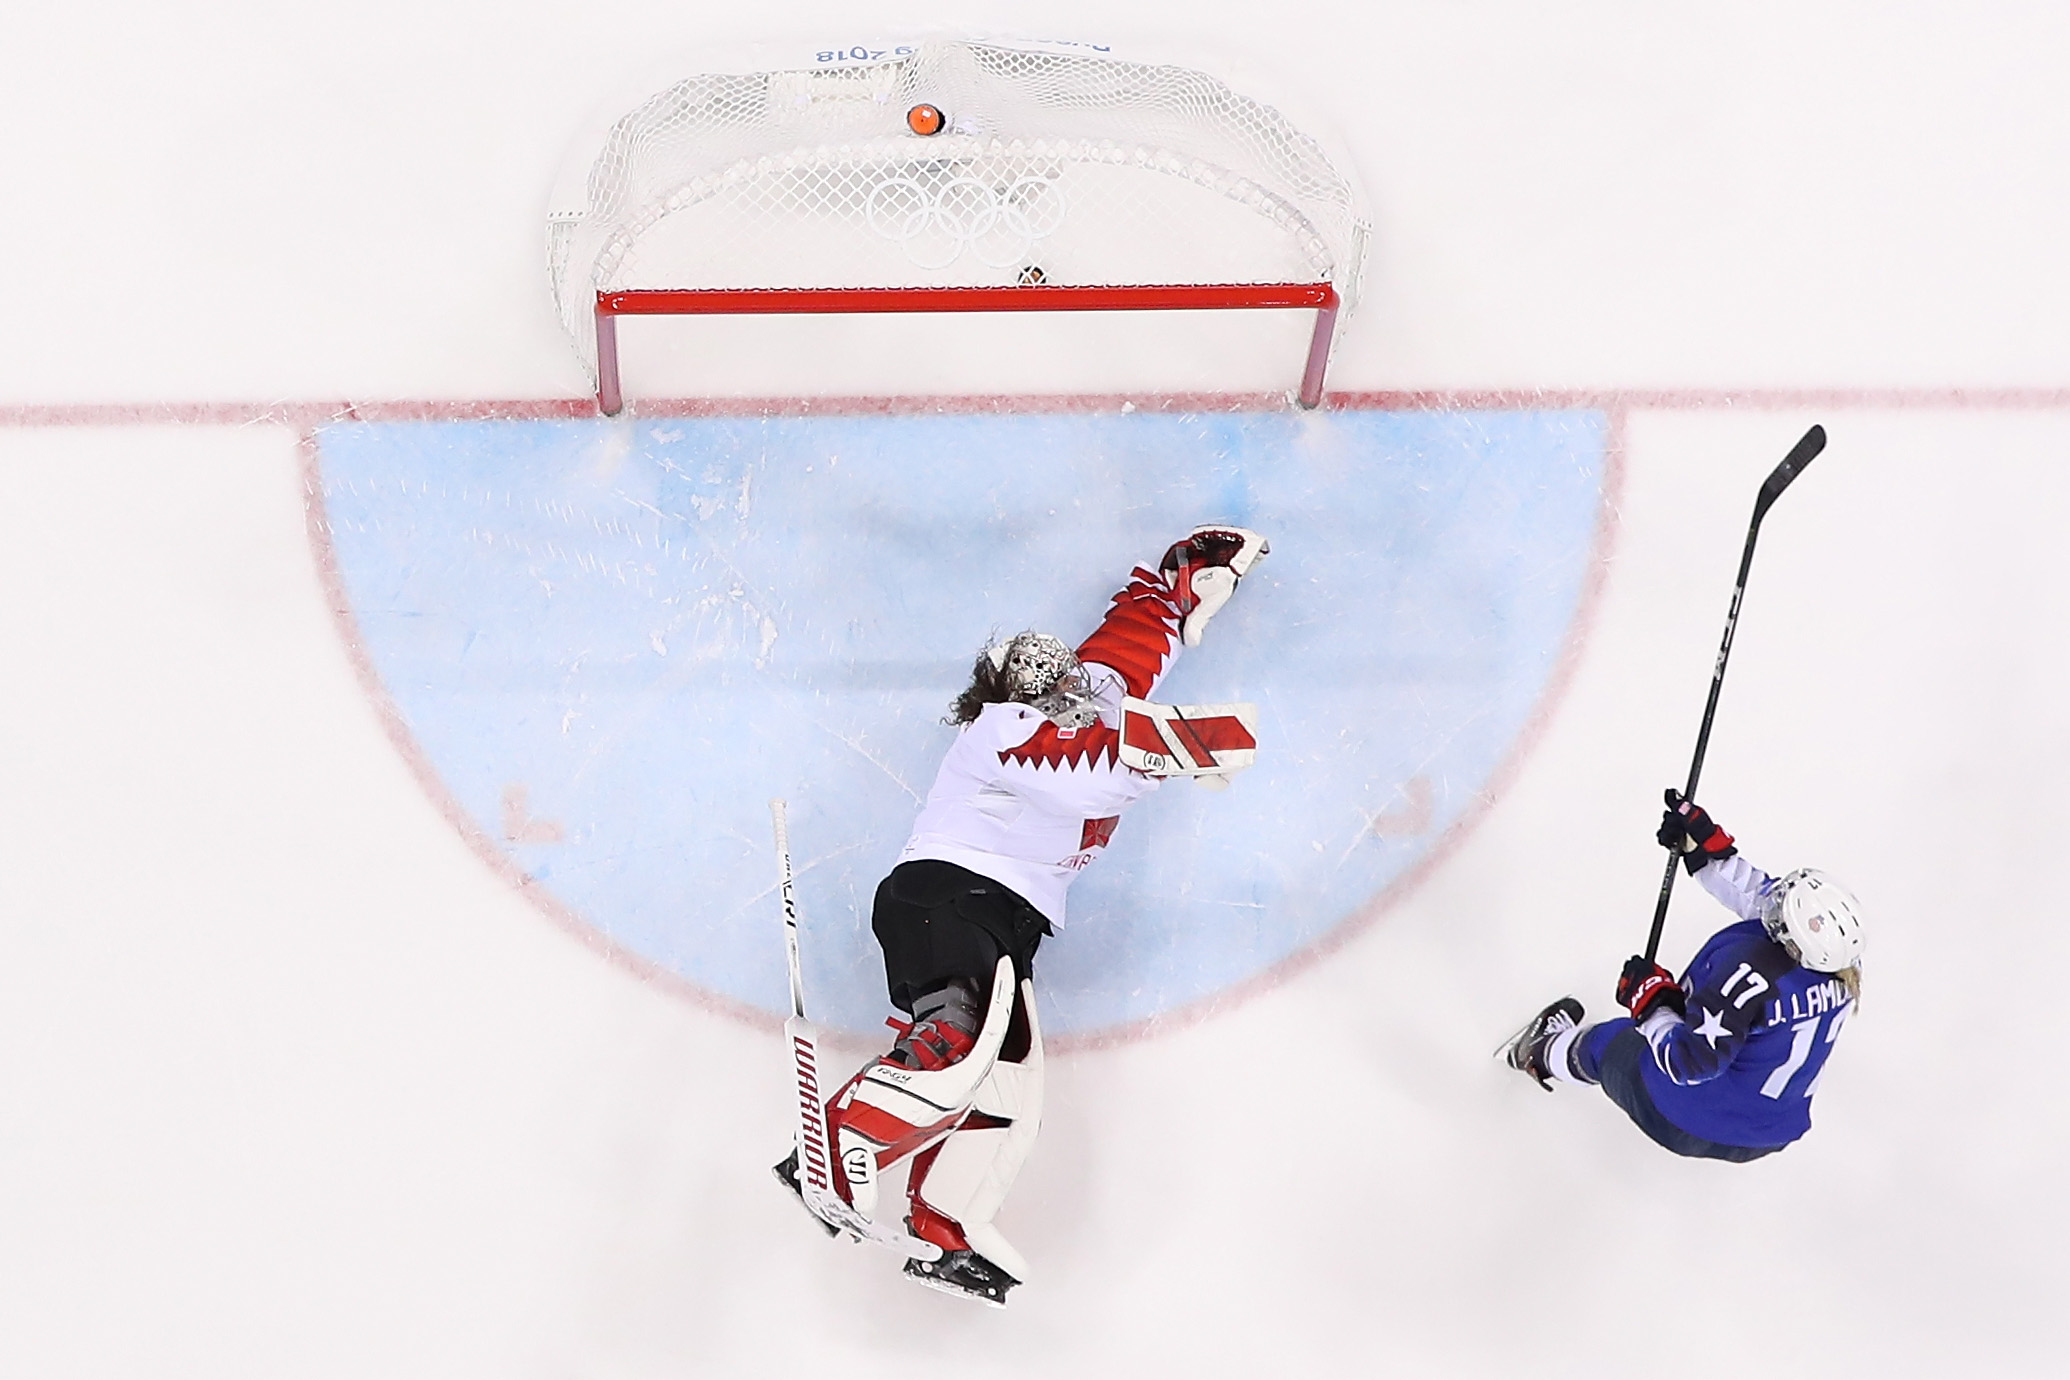 Jocelyne Lamoureux #17 of the United States scores a goal against Shannon Szabados #1 of Canada in a shootout to win the Women's Gold Medal Game on day thirteen of the PyeongChang 2018 Winter Olympic Games at Gangneung Hockey Centre on February 22, 2018 in Gangneung, South Korea.